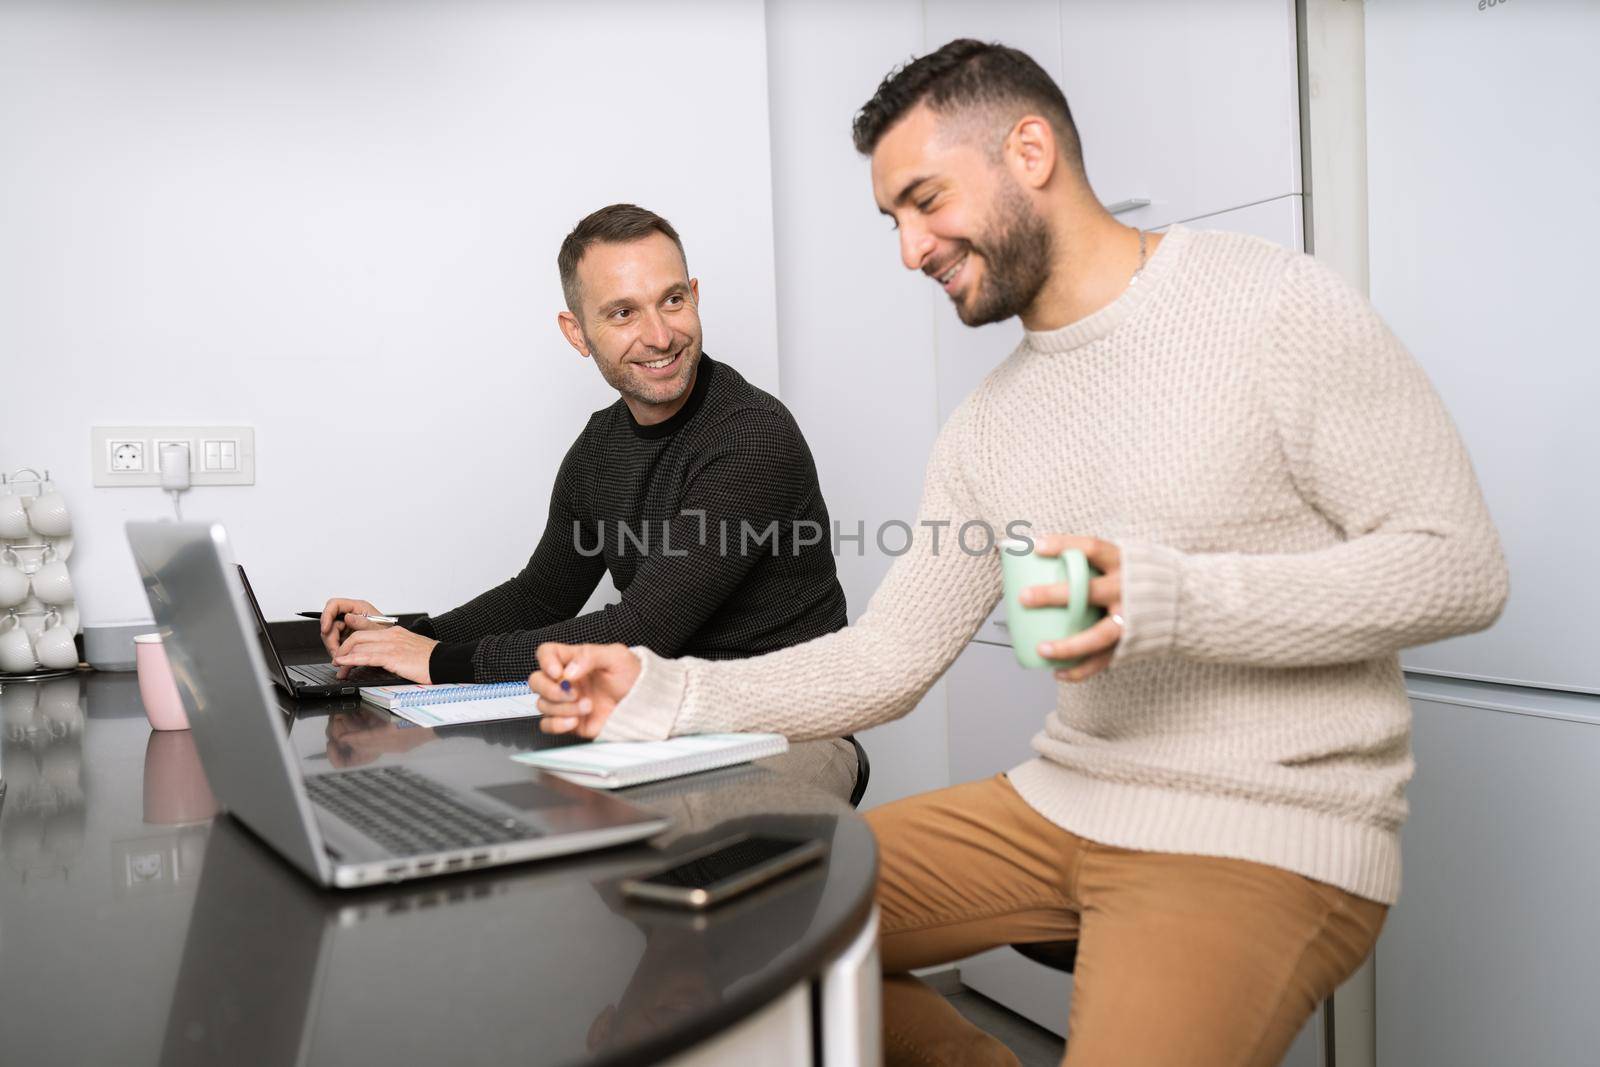 Gay couple working together at home with their laptops. Lifestyle concept.